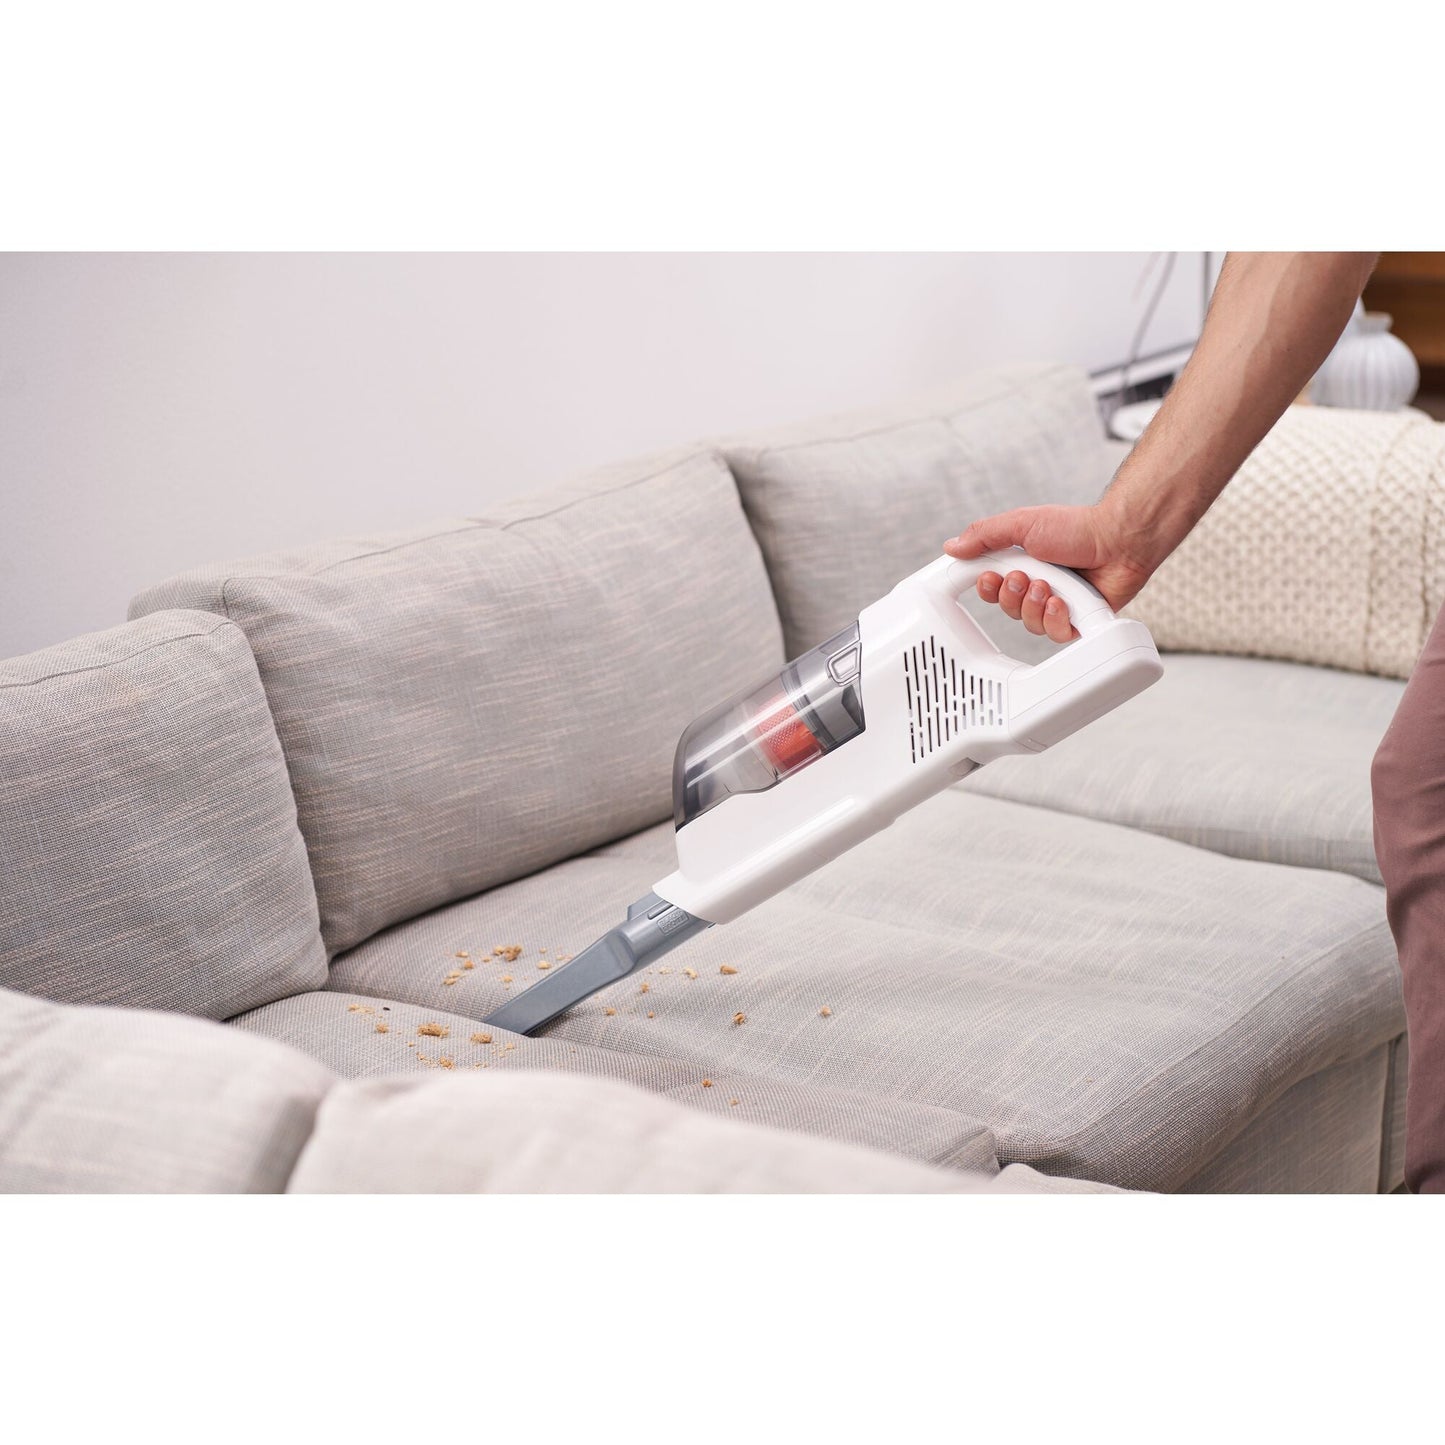 18V 2-IN-1 STICK VACUUM WITH INTEGRAL 1.5AH BATTERY